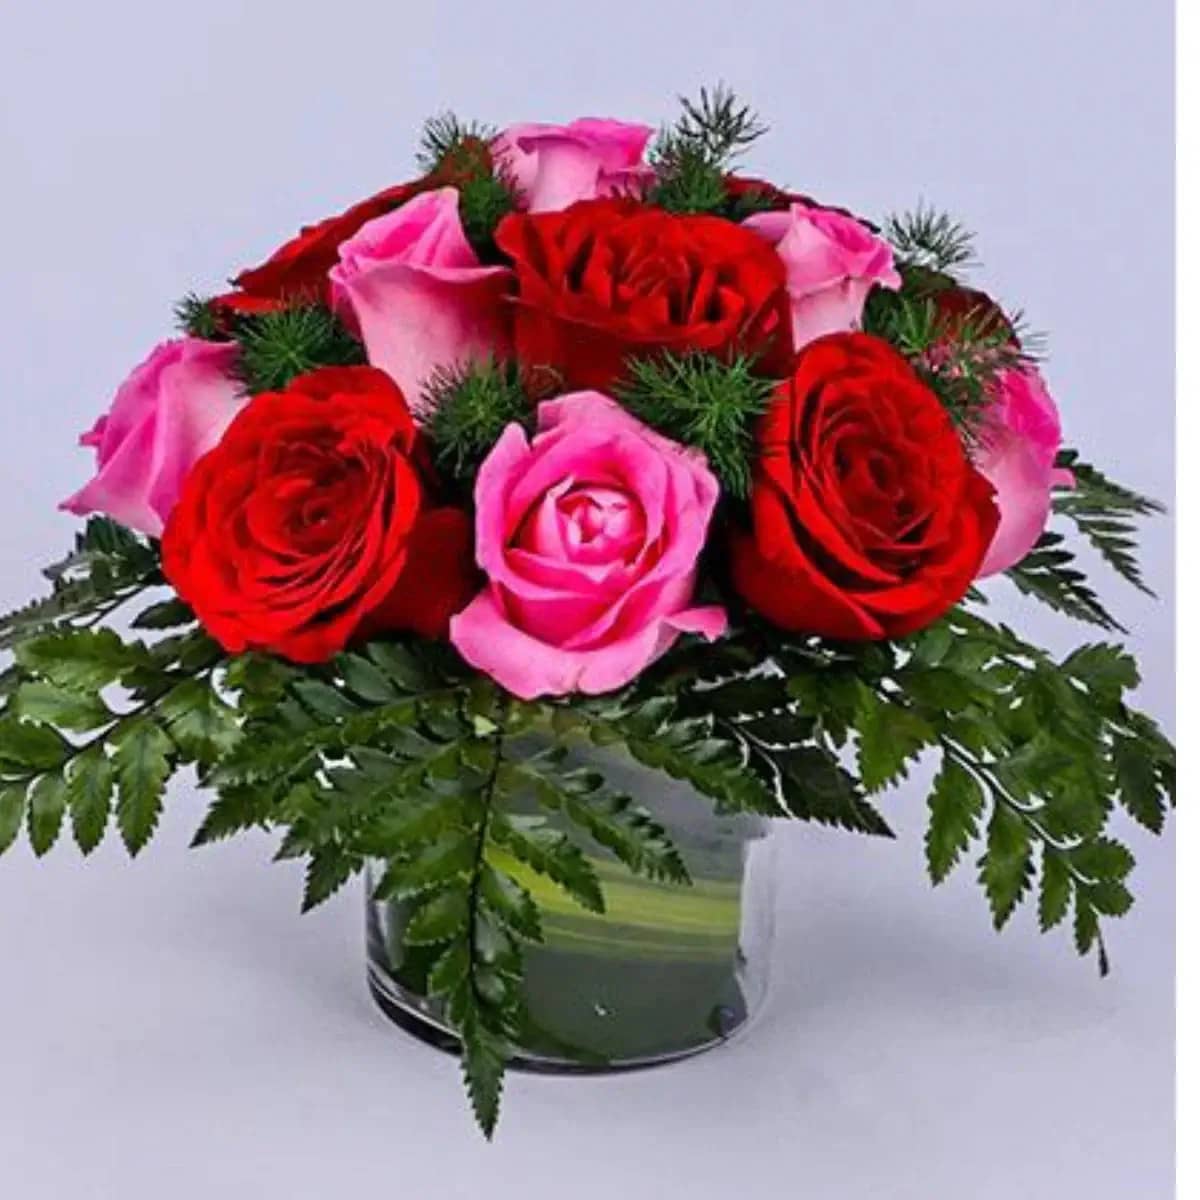 Pink-Red Roses Flower bouquet - The Perfect Red Roses Bouquet for Every Occasion